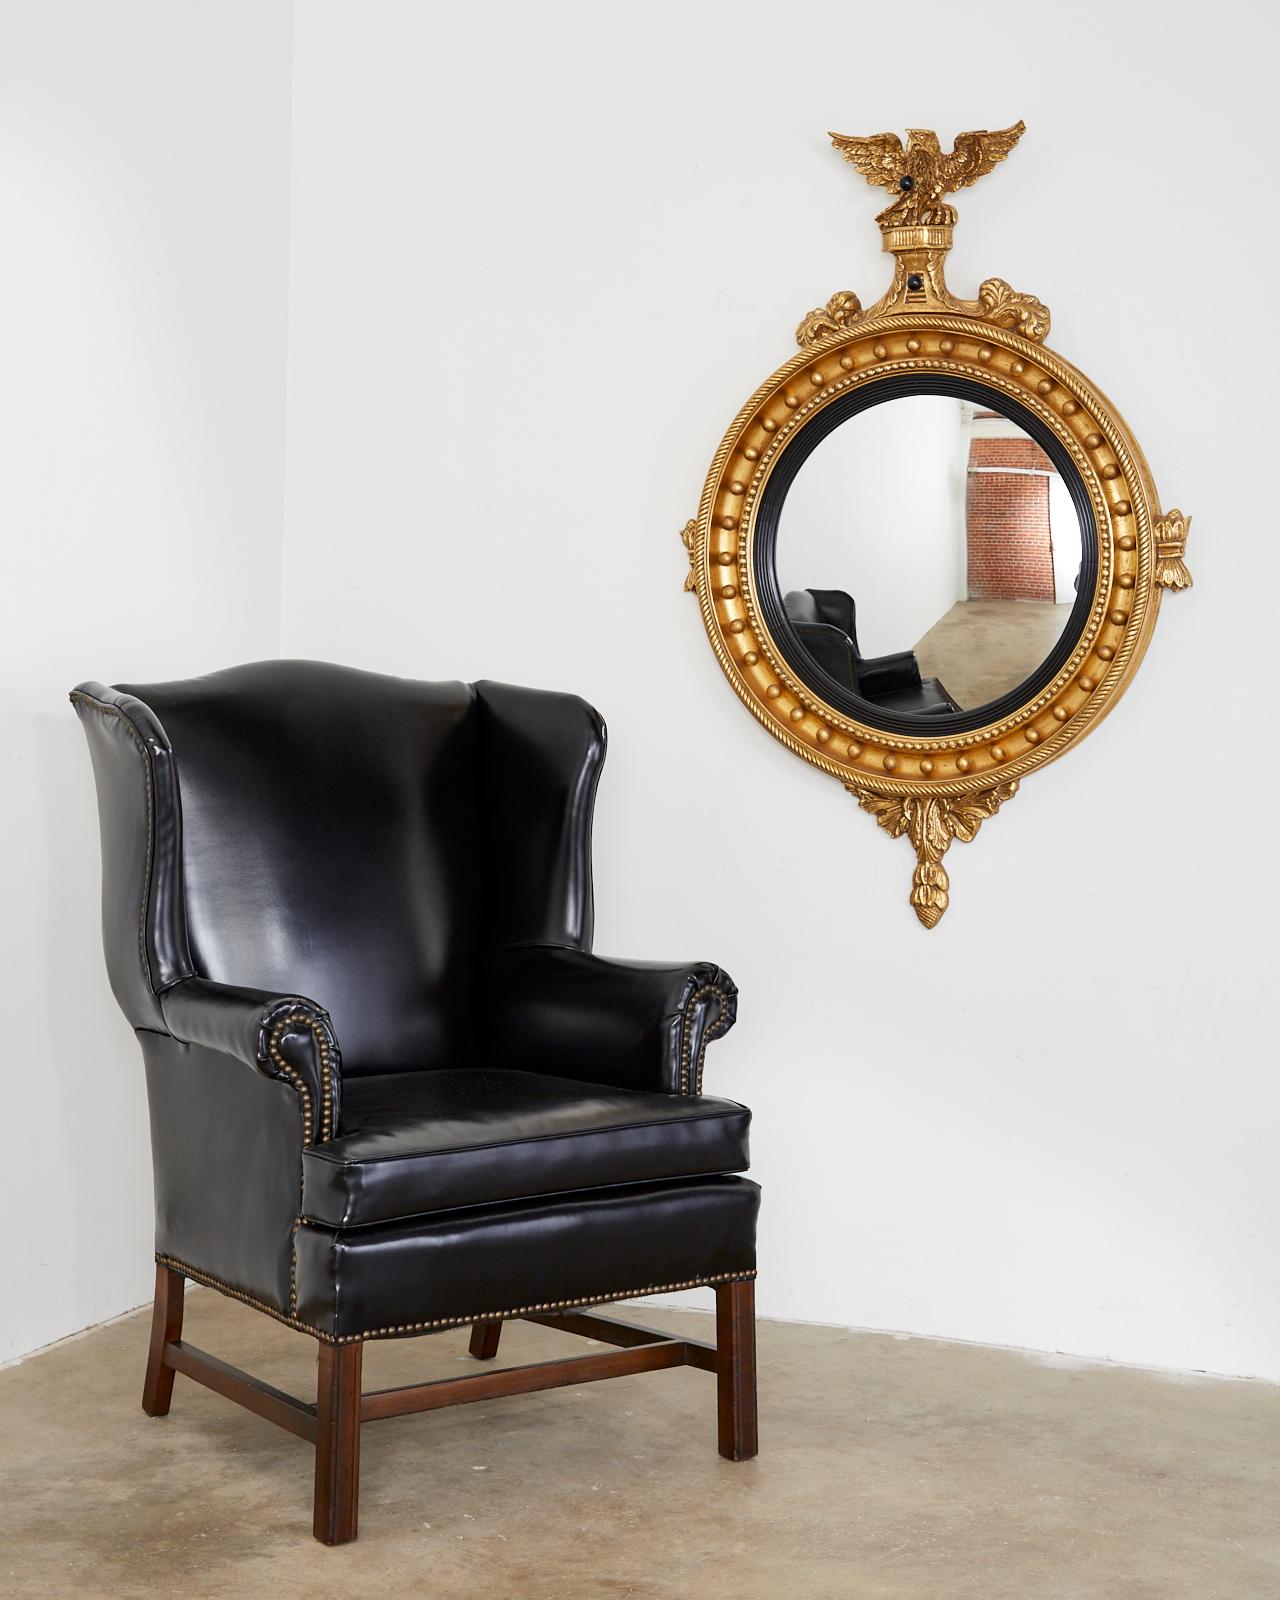 Exceptional English Regency style convex Girandole mirror made by Friedman Brothers decorative arts. Painstaking model of an 18th century hand-crafted gilt wood Girandole mirror. Features a large 21 inch convex or bullseye mirror with an ebonized